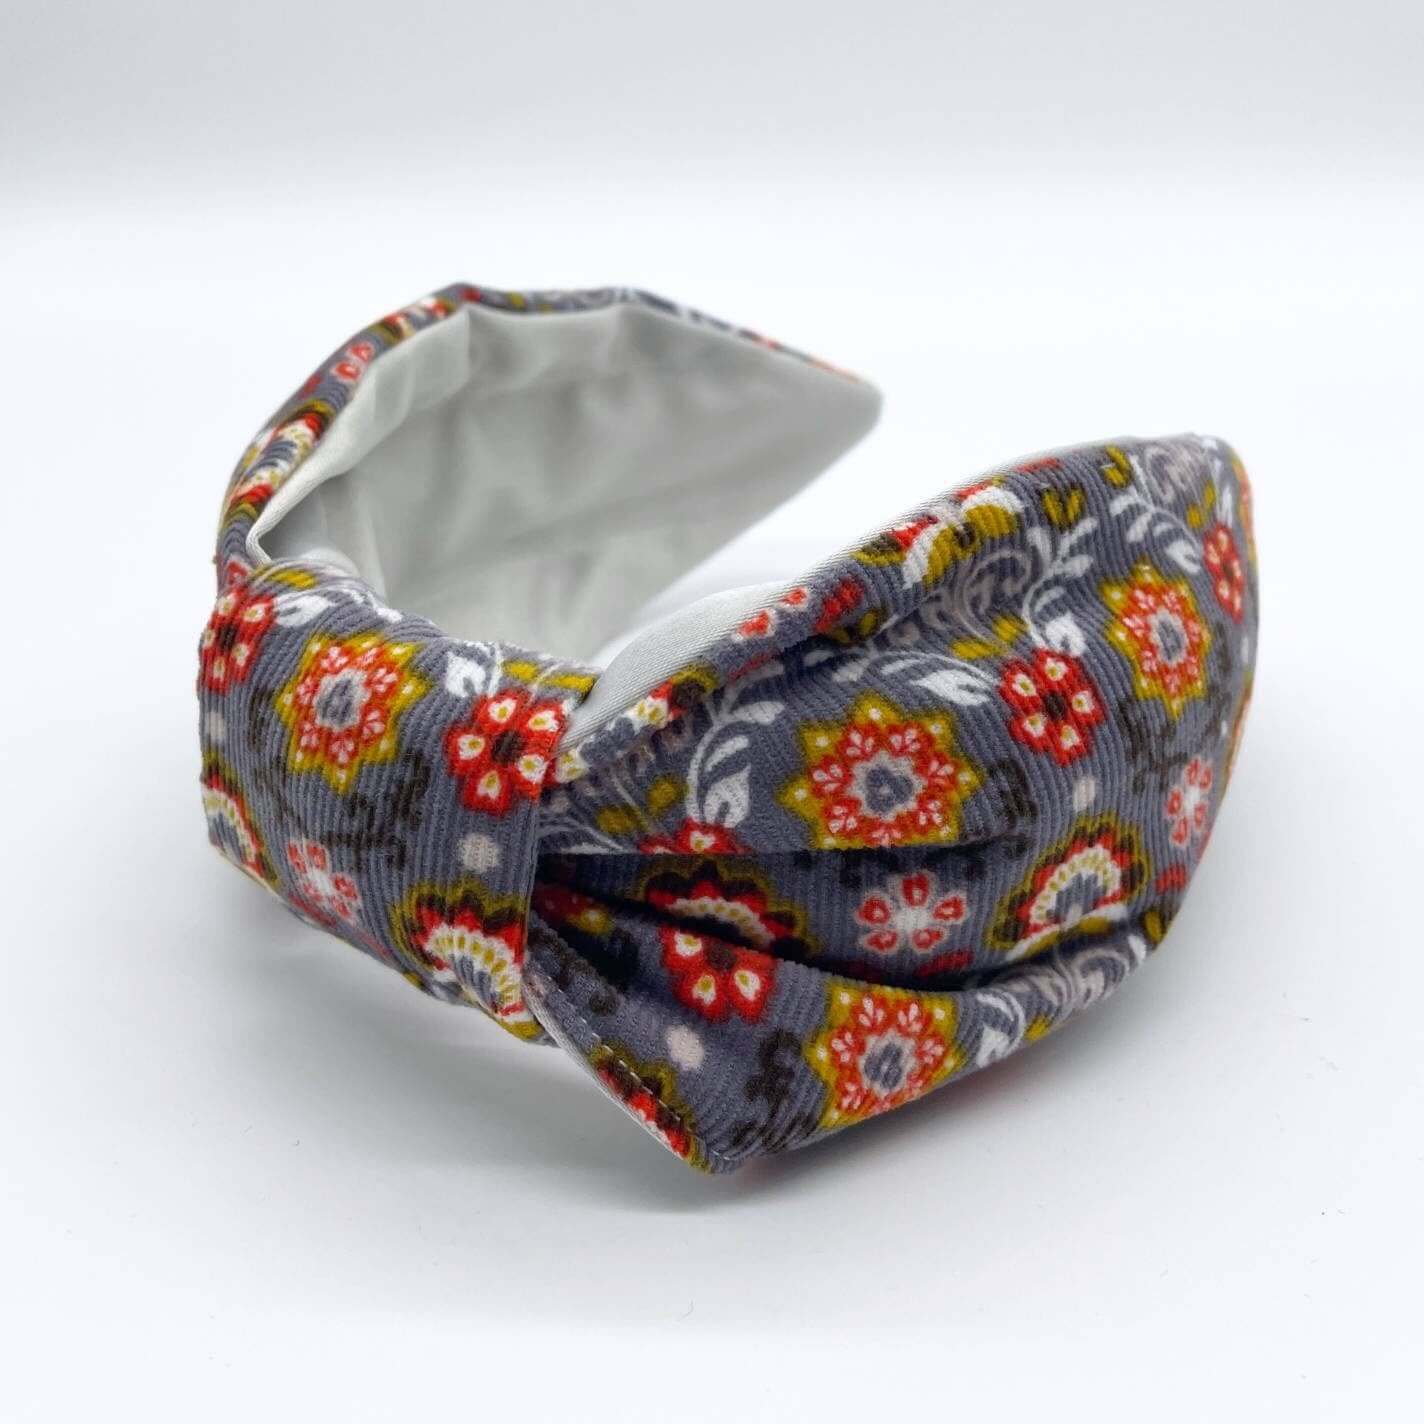 A bow-style, Scandinavian pale grey floral-print knot headband with an ice-white lining underneath.